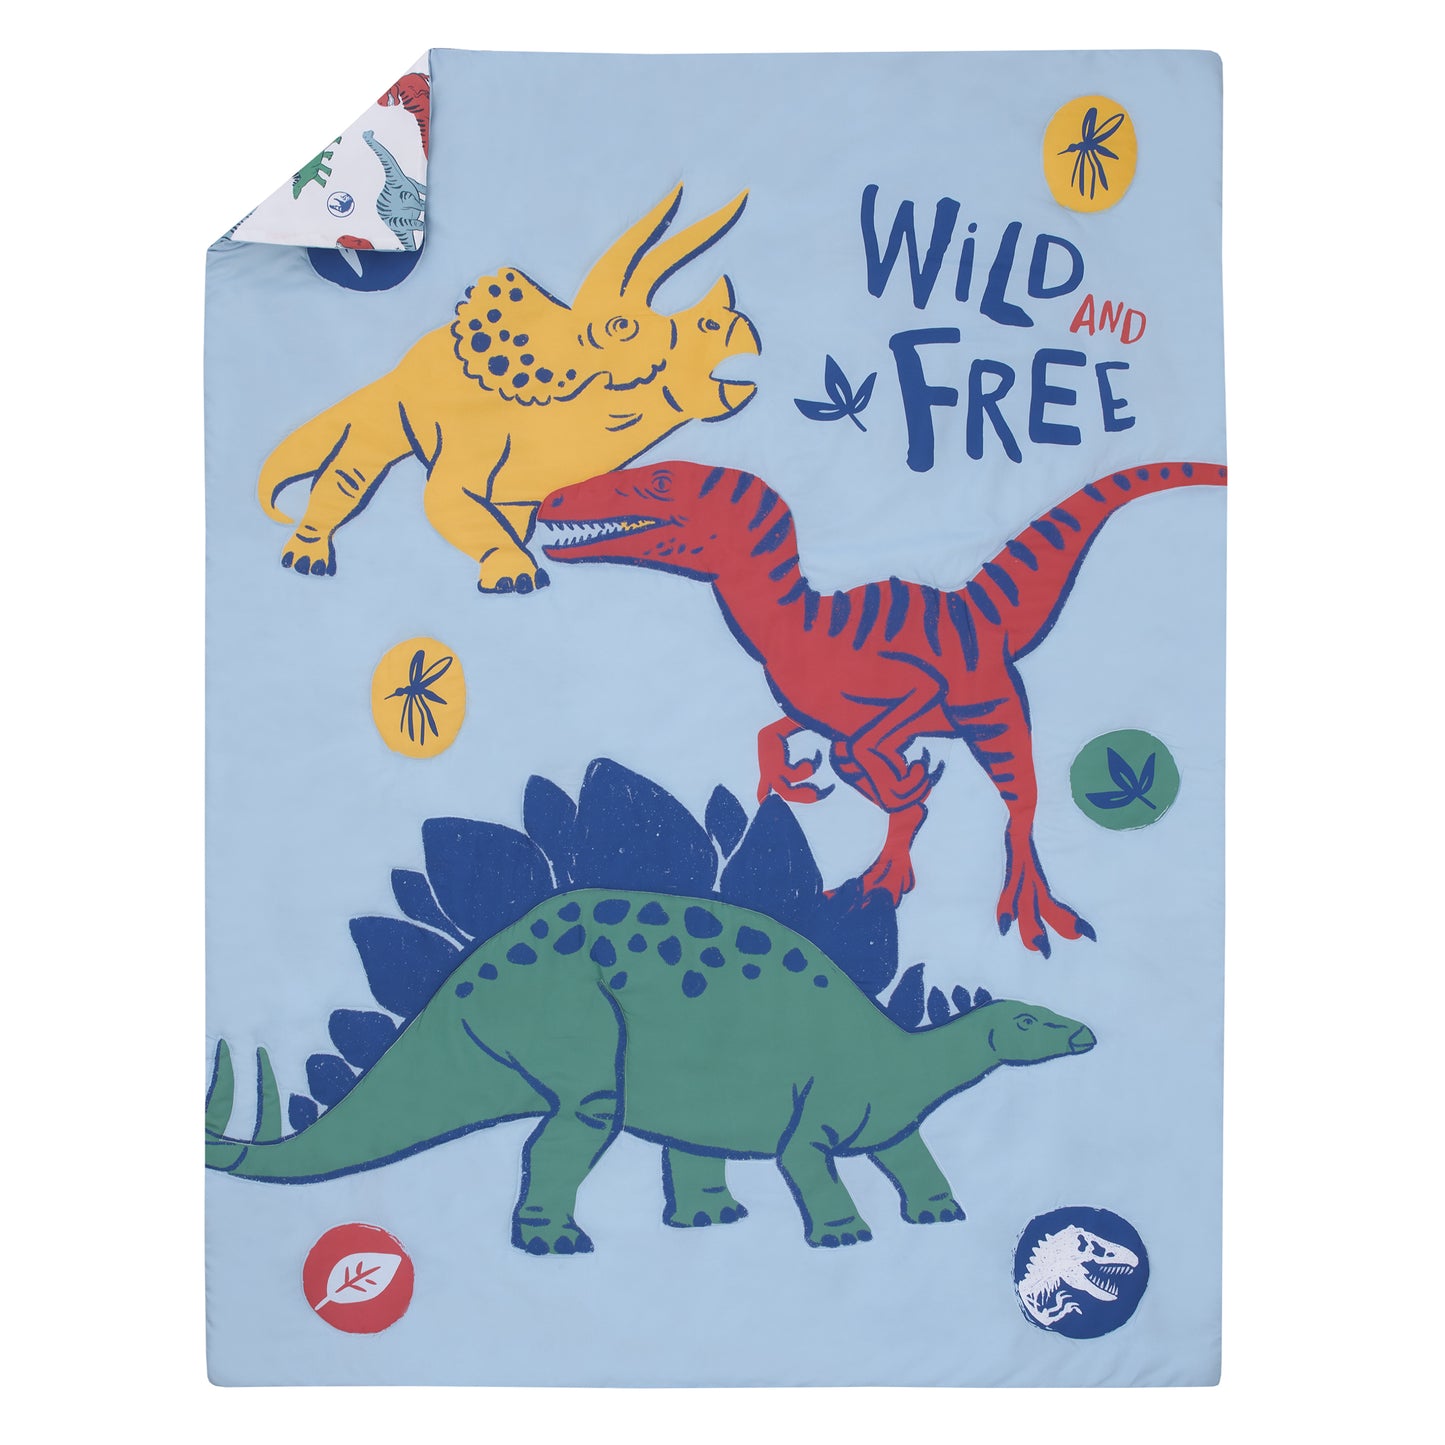 Universal Jurassic World Wild and Free Blue, Green, and Yellow Dinosaur 4 Piece Toddler Bed Set - Comforter, Fitted Bottom Sheet, Flat Top Sheet, Reversible Pillowcase